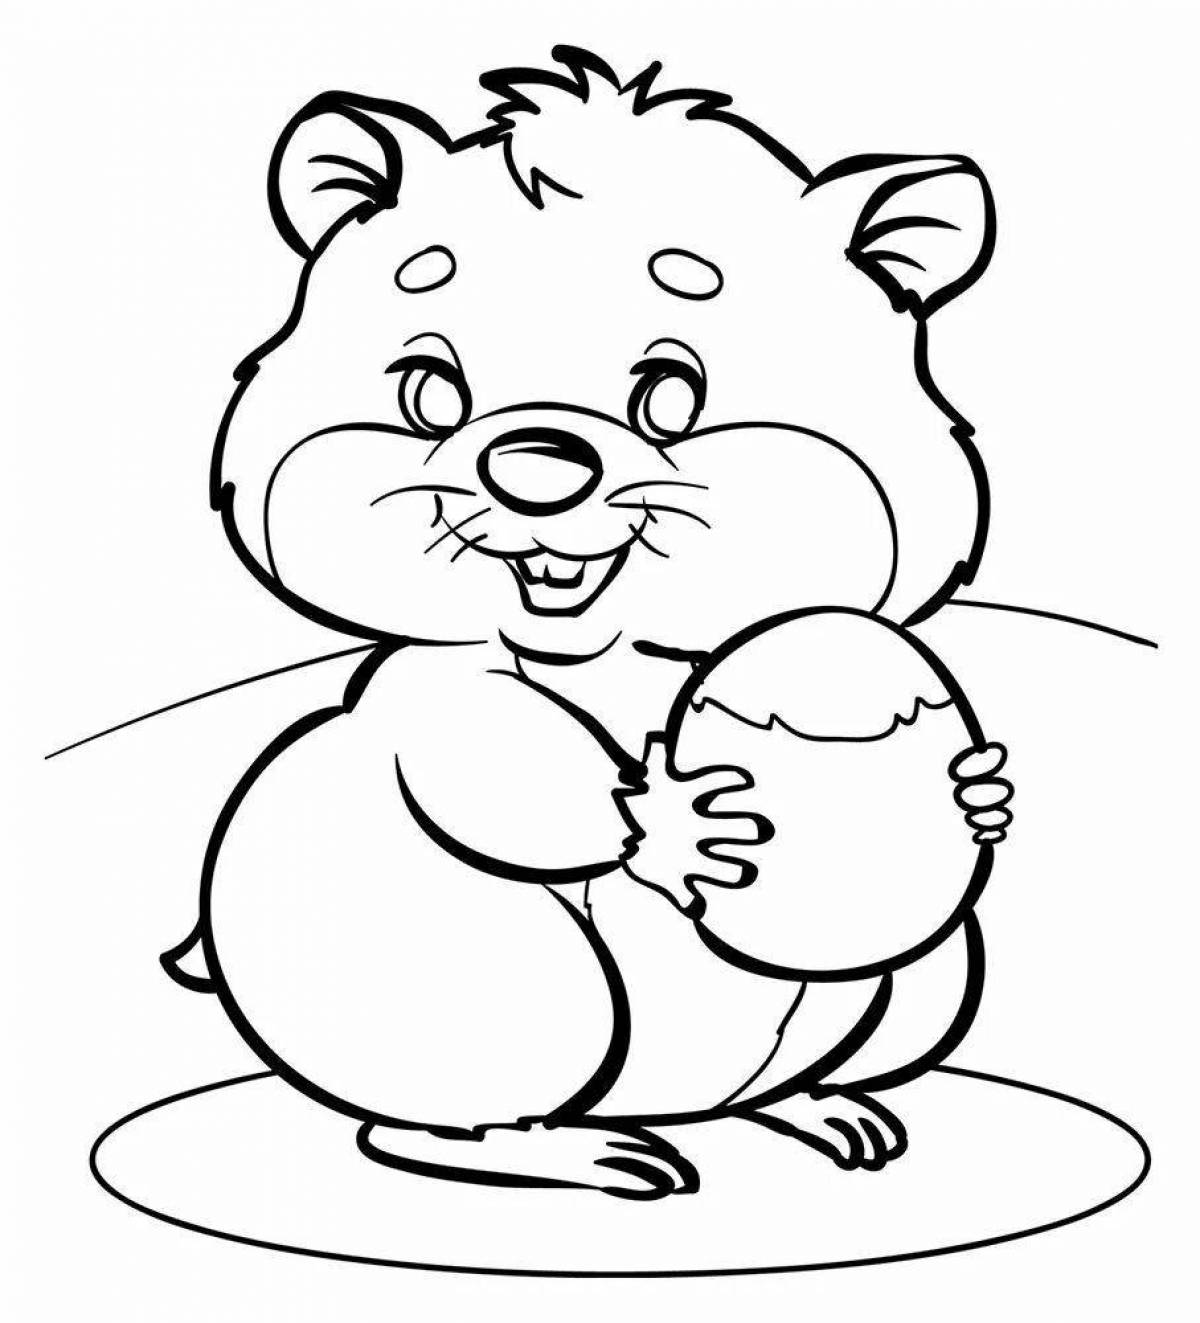 Amazing hamster coloring book